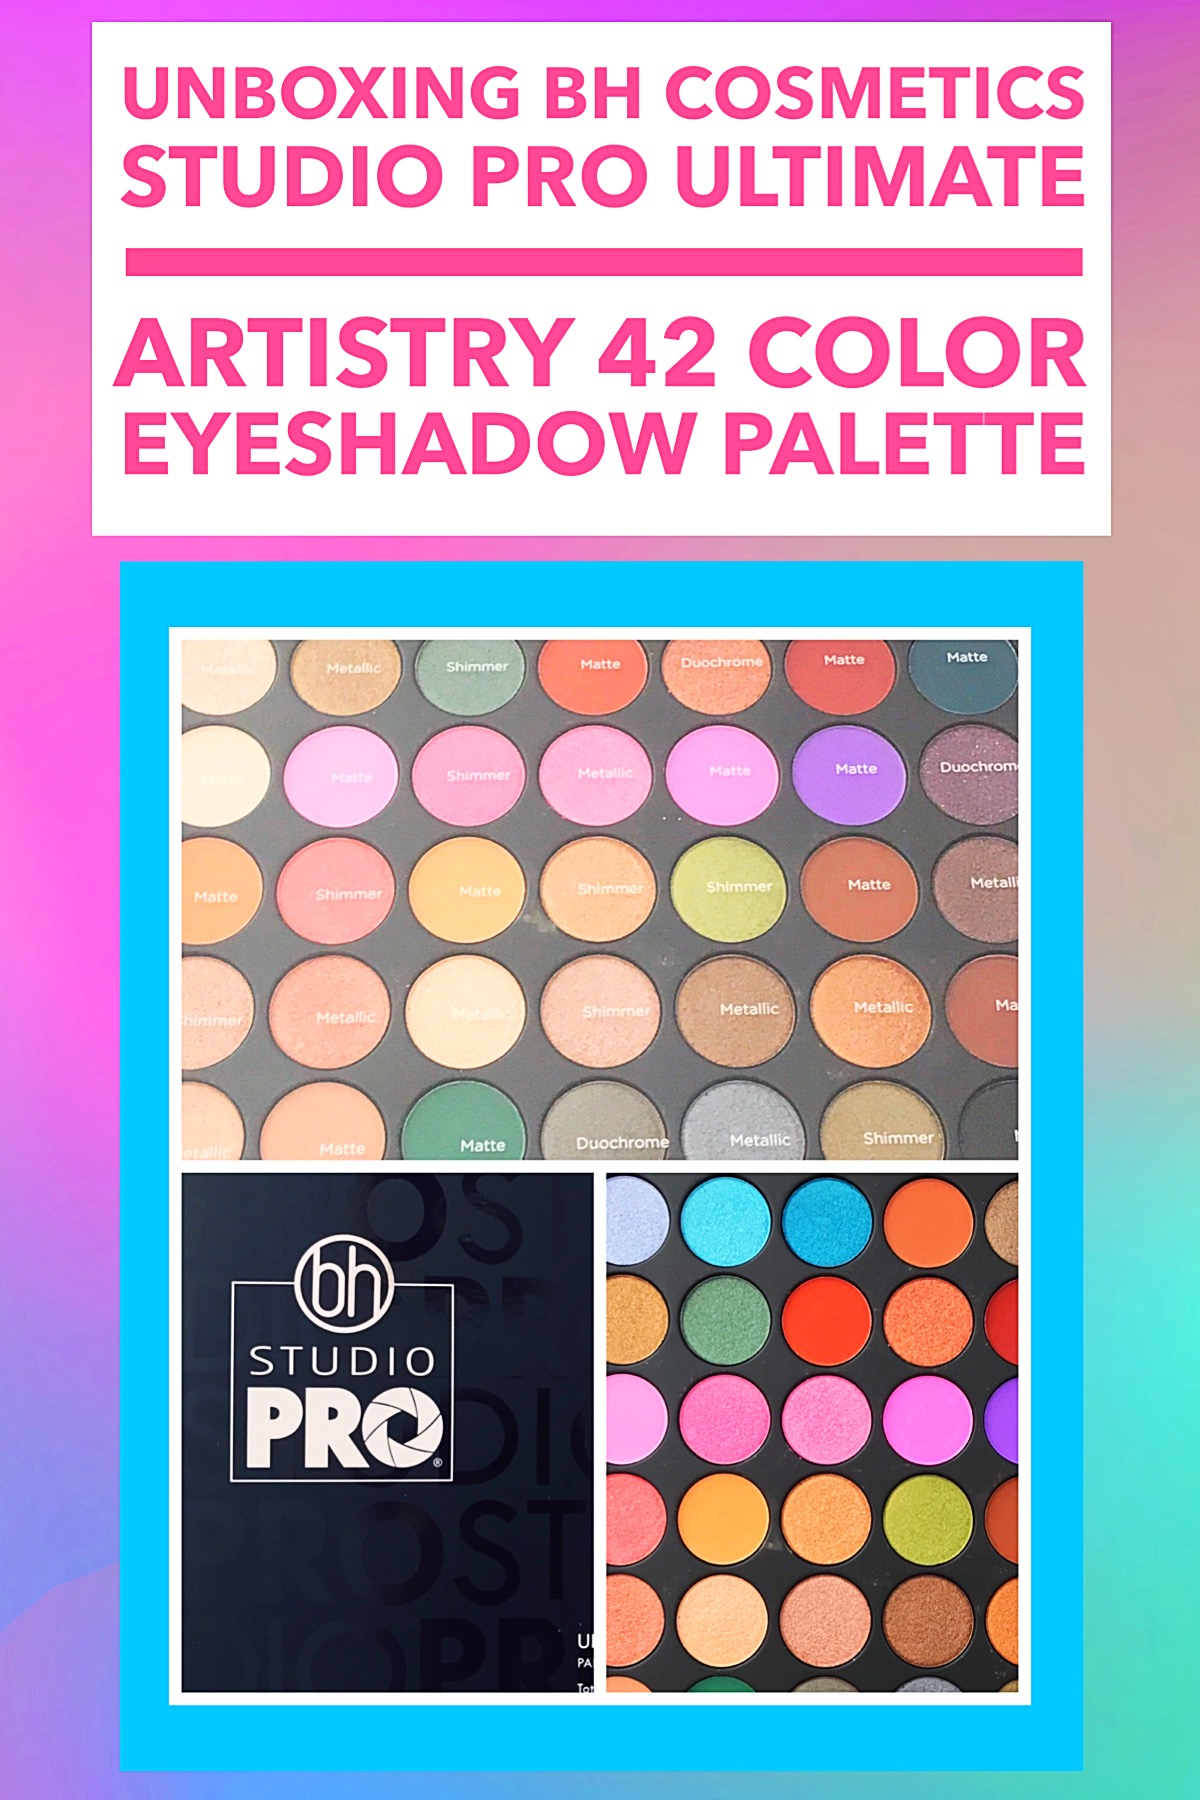 Unboxing Bh Cosmetics Studio Pro Ultimate Artistry 42 Color Eyeshadow Palette